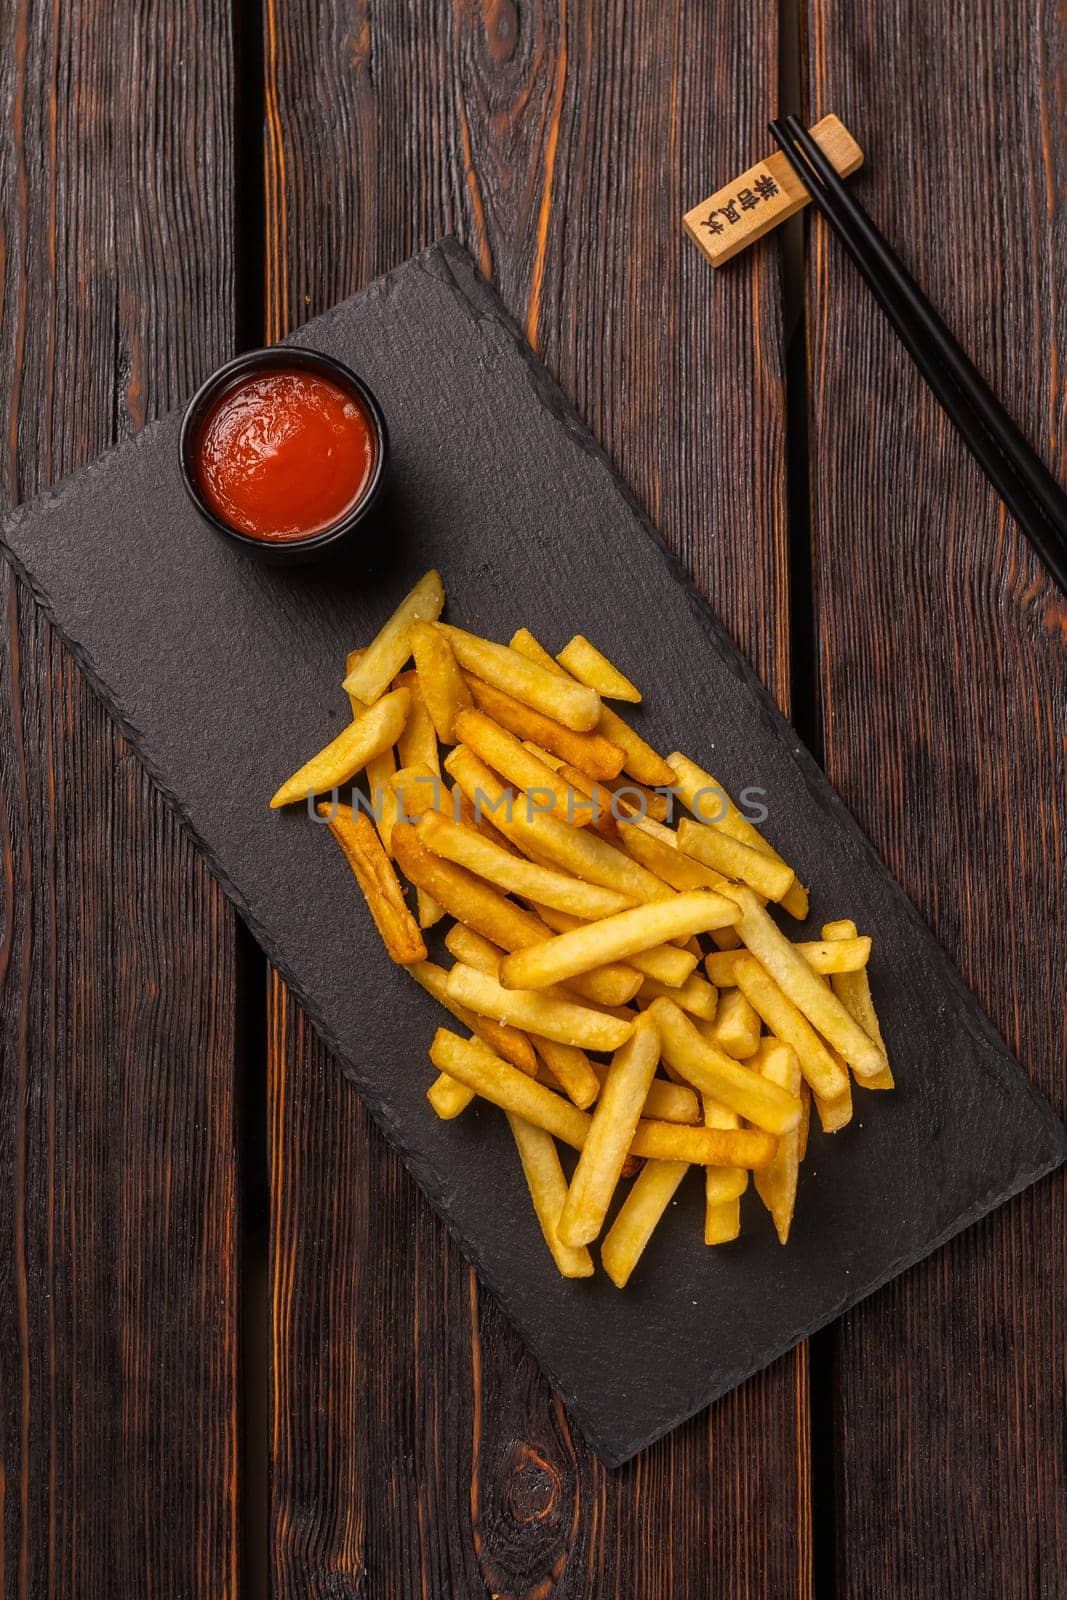 French fries with ketchup on dark background, top view